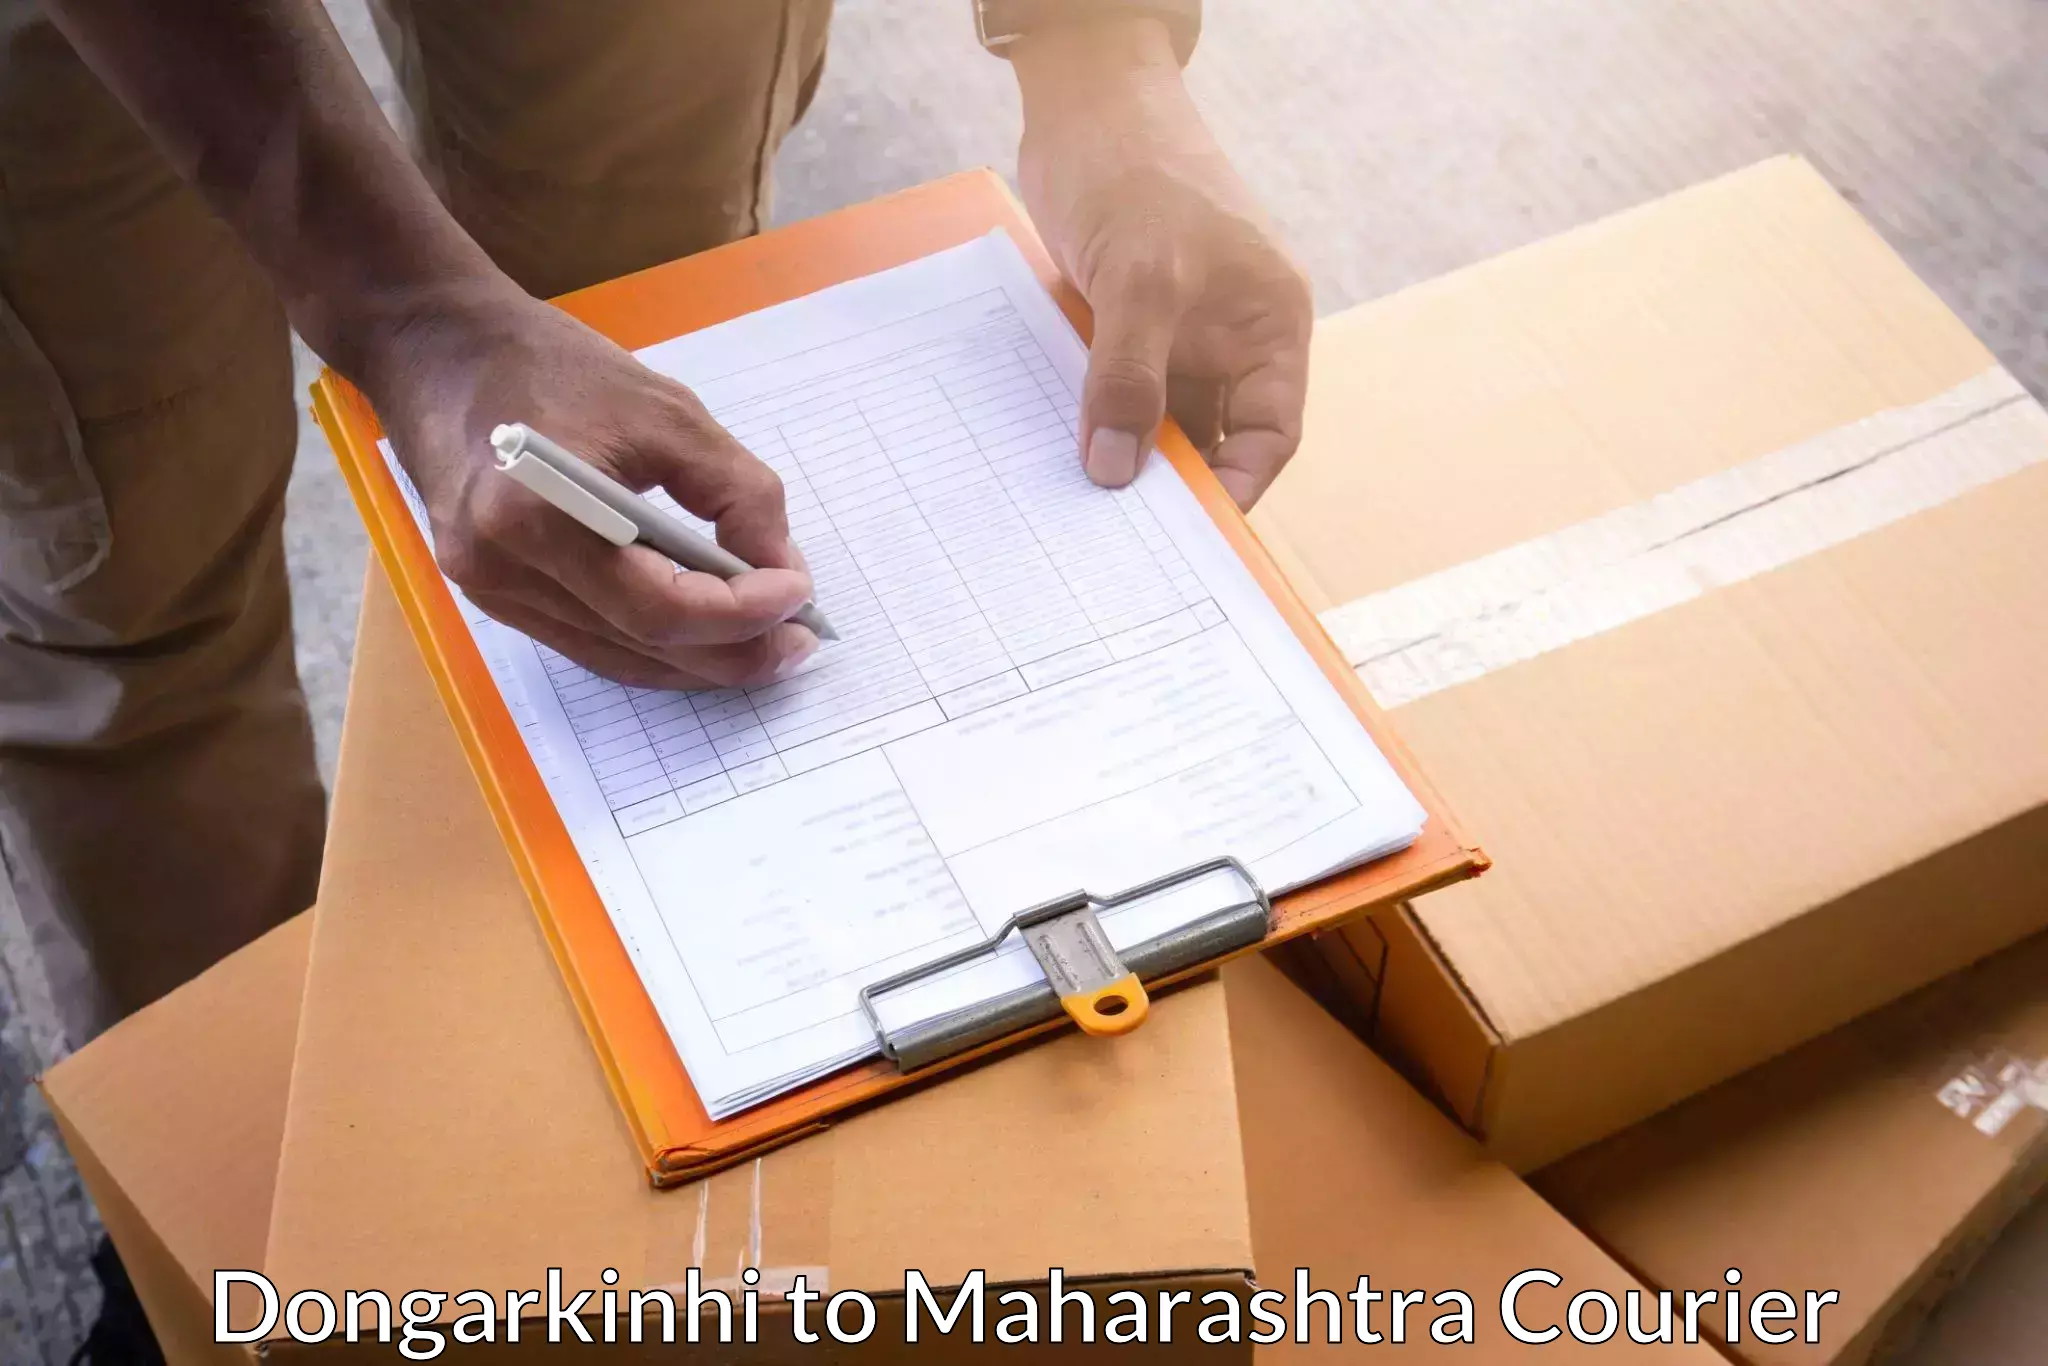 Dynamic courier operations Dongarkinhi to Vadgaon